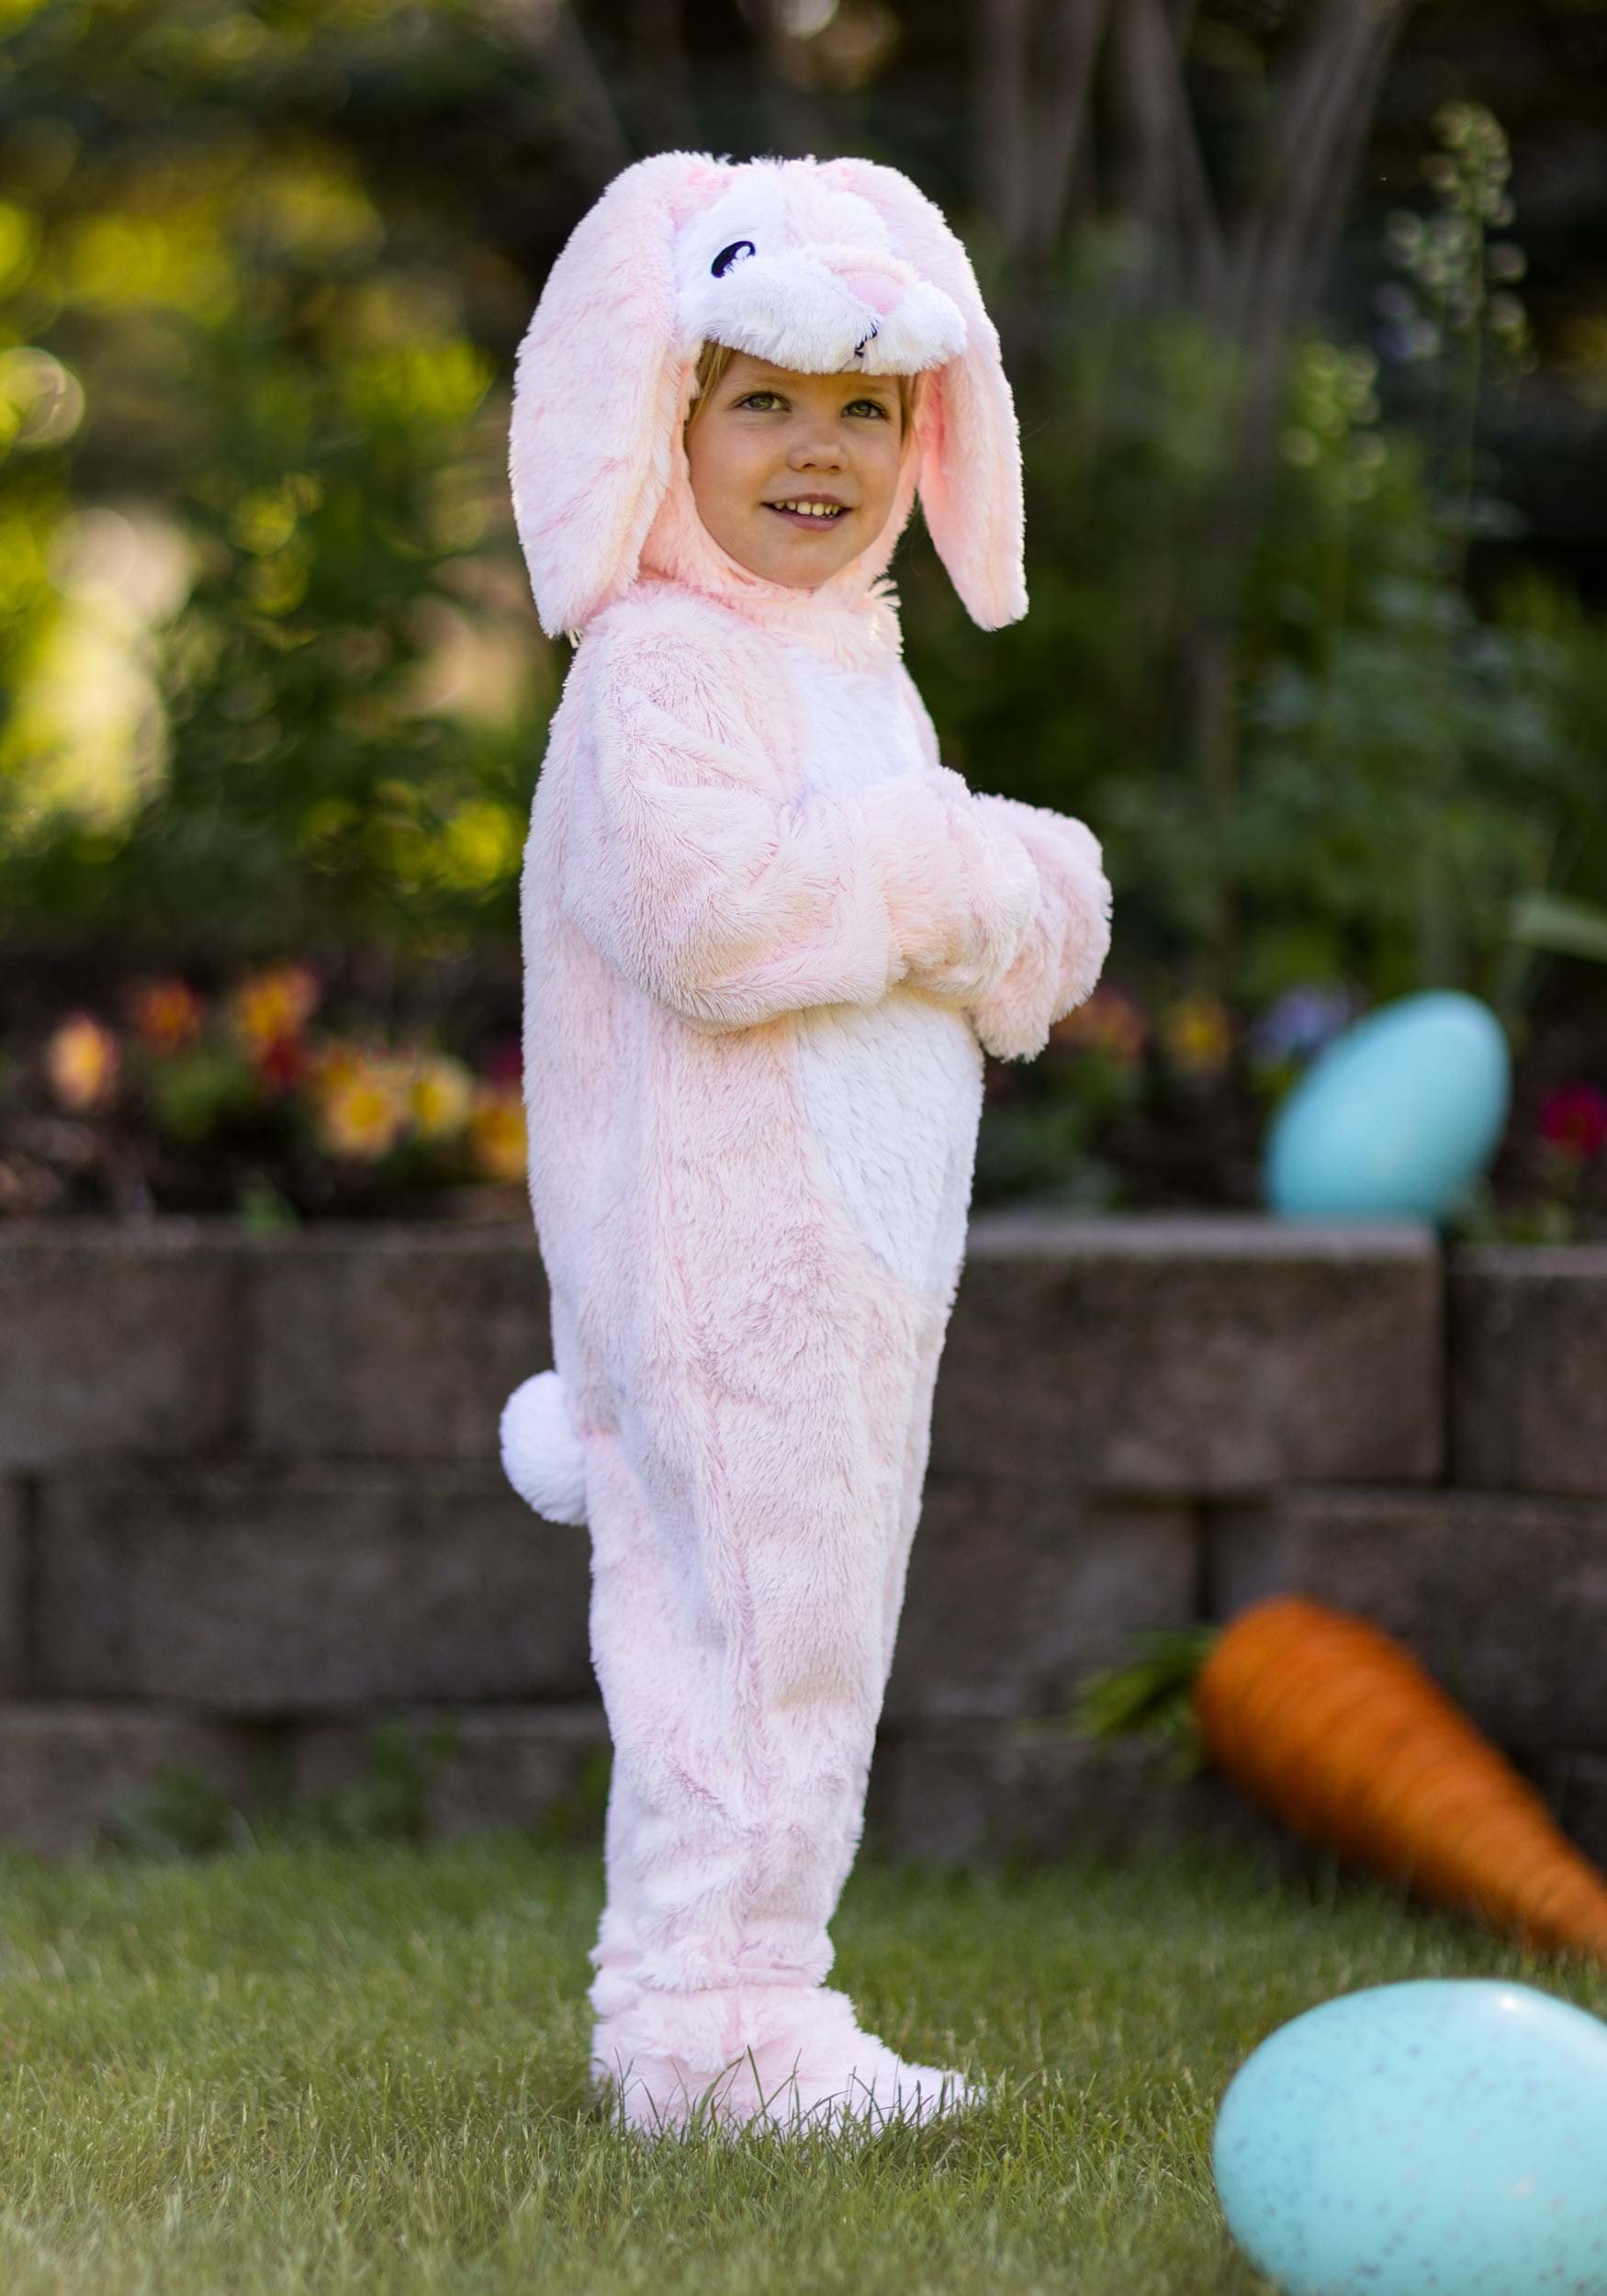 Exclusive Toddler Fluffy Pink Bunny Costume